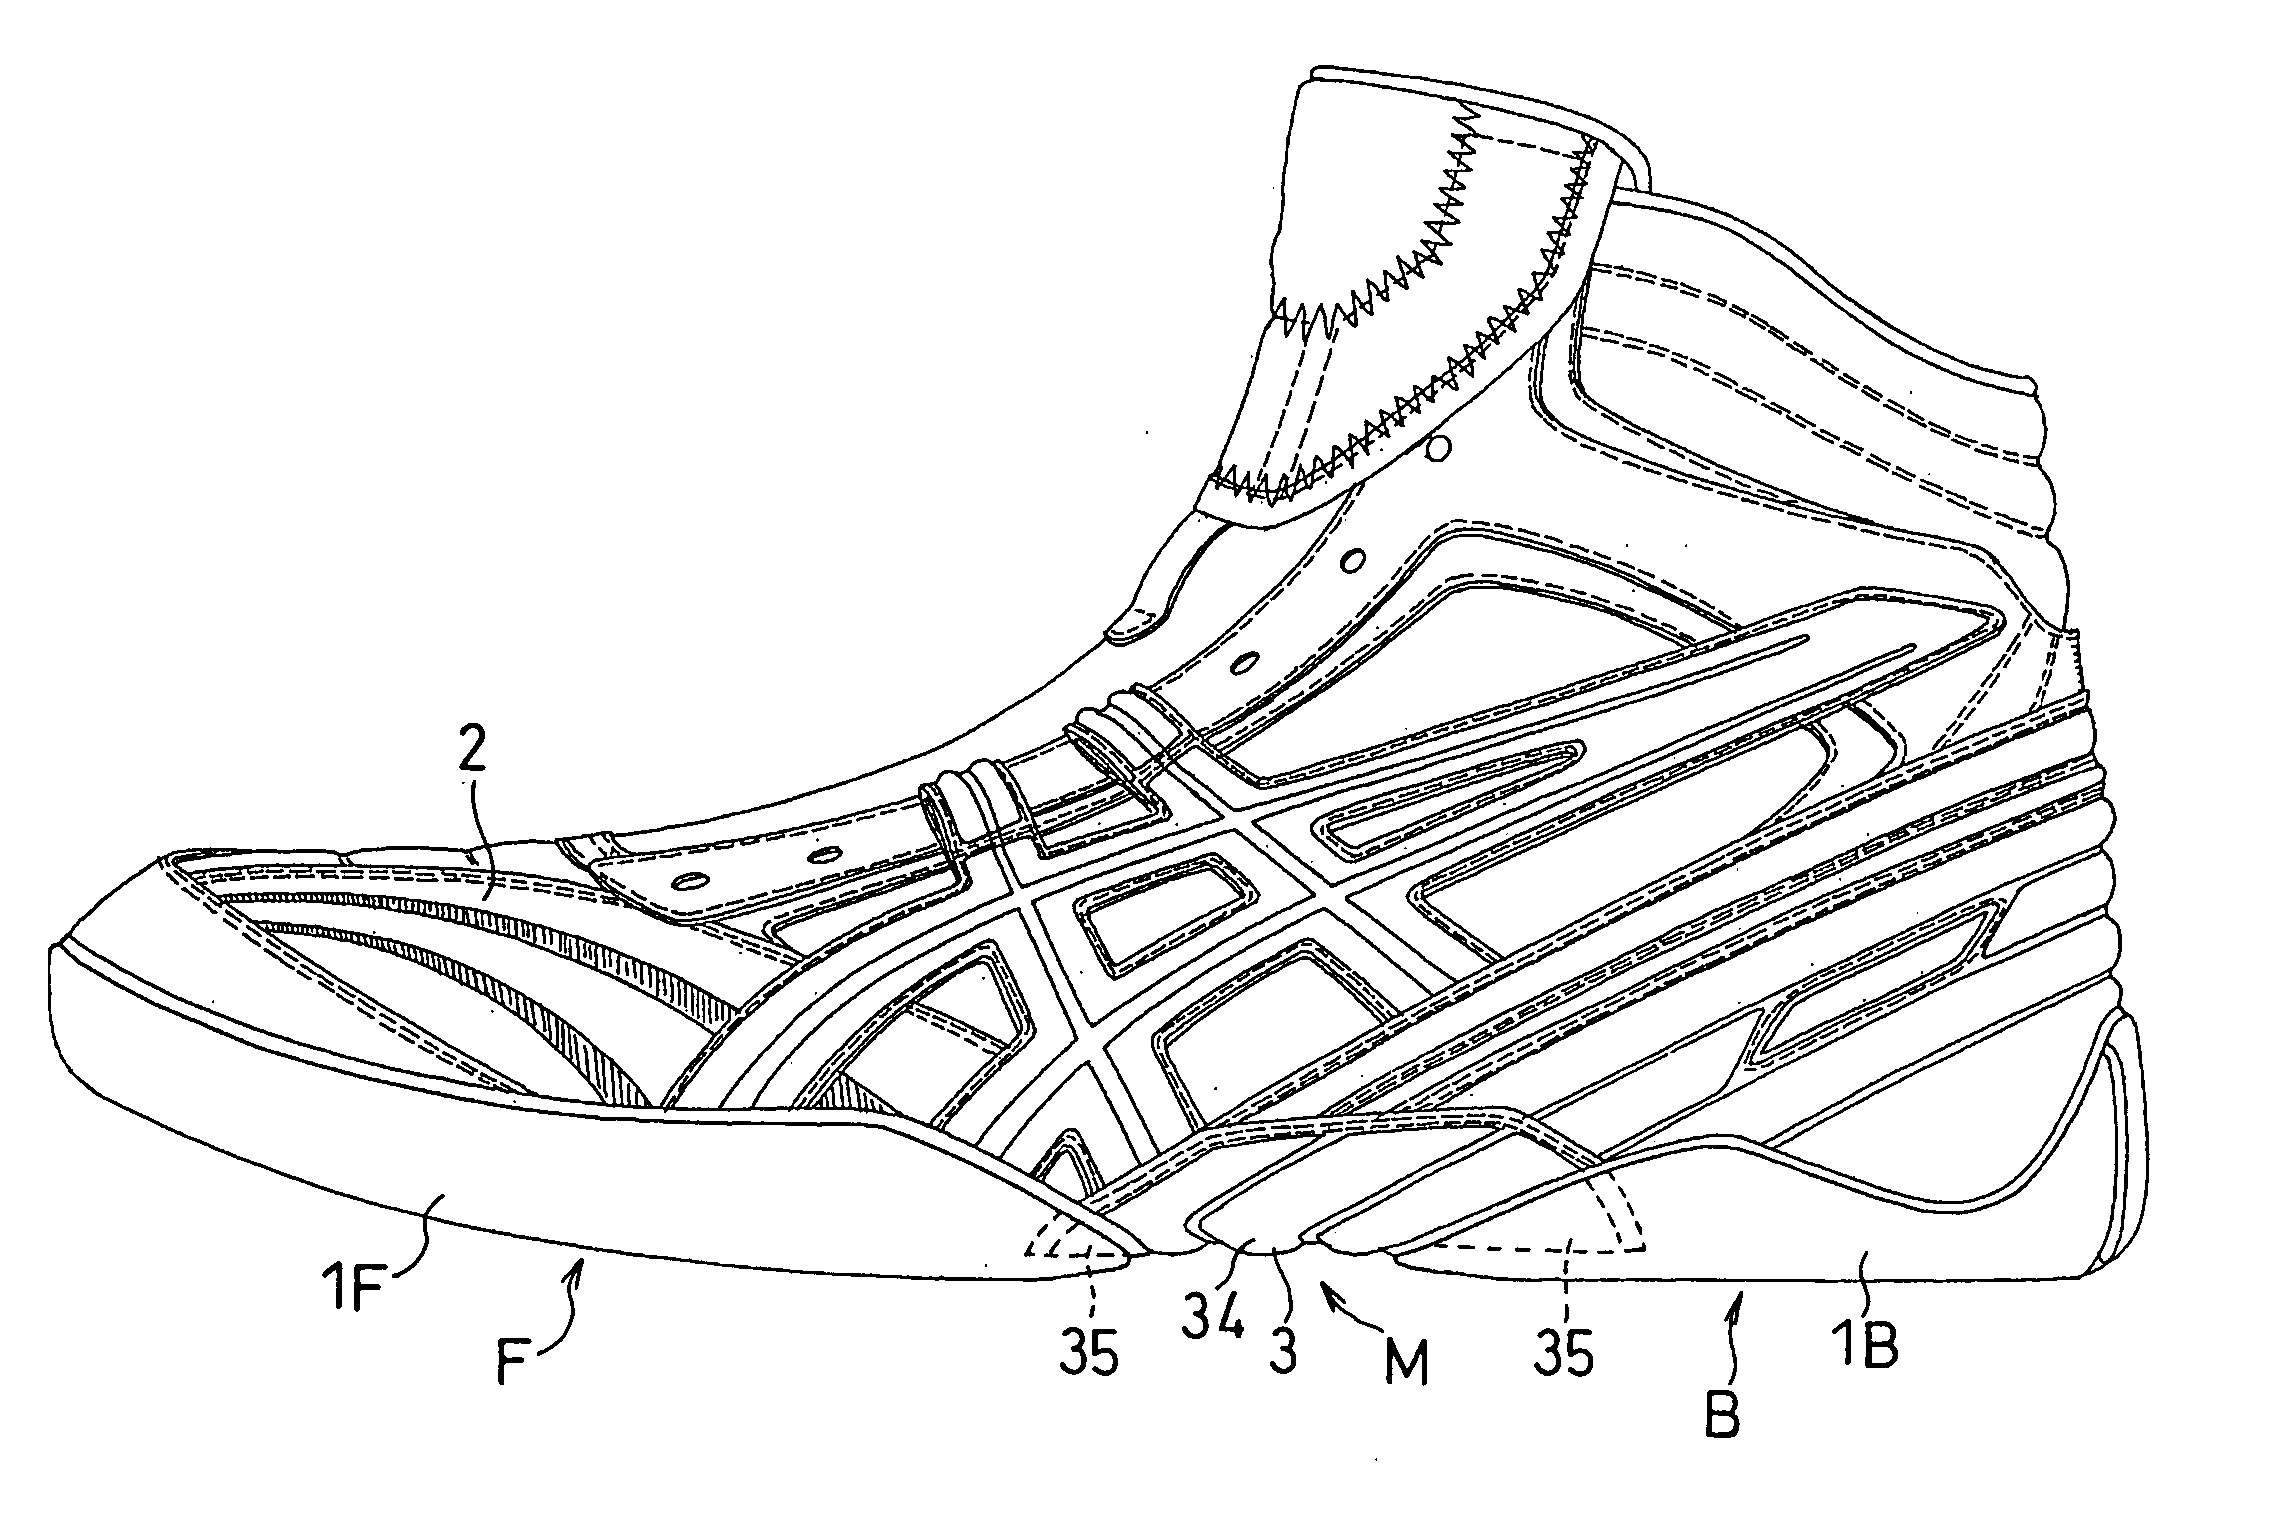 Wrestling shoe with separated outer soles